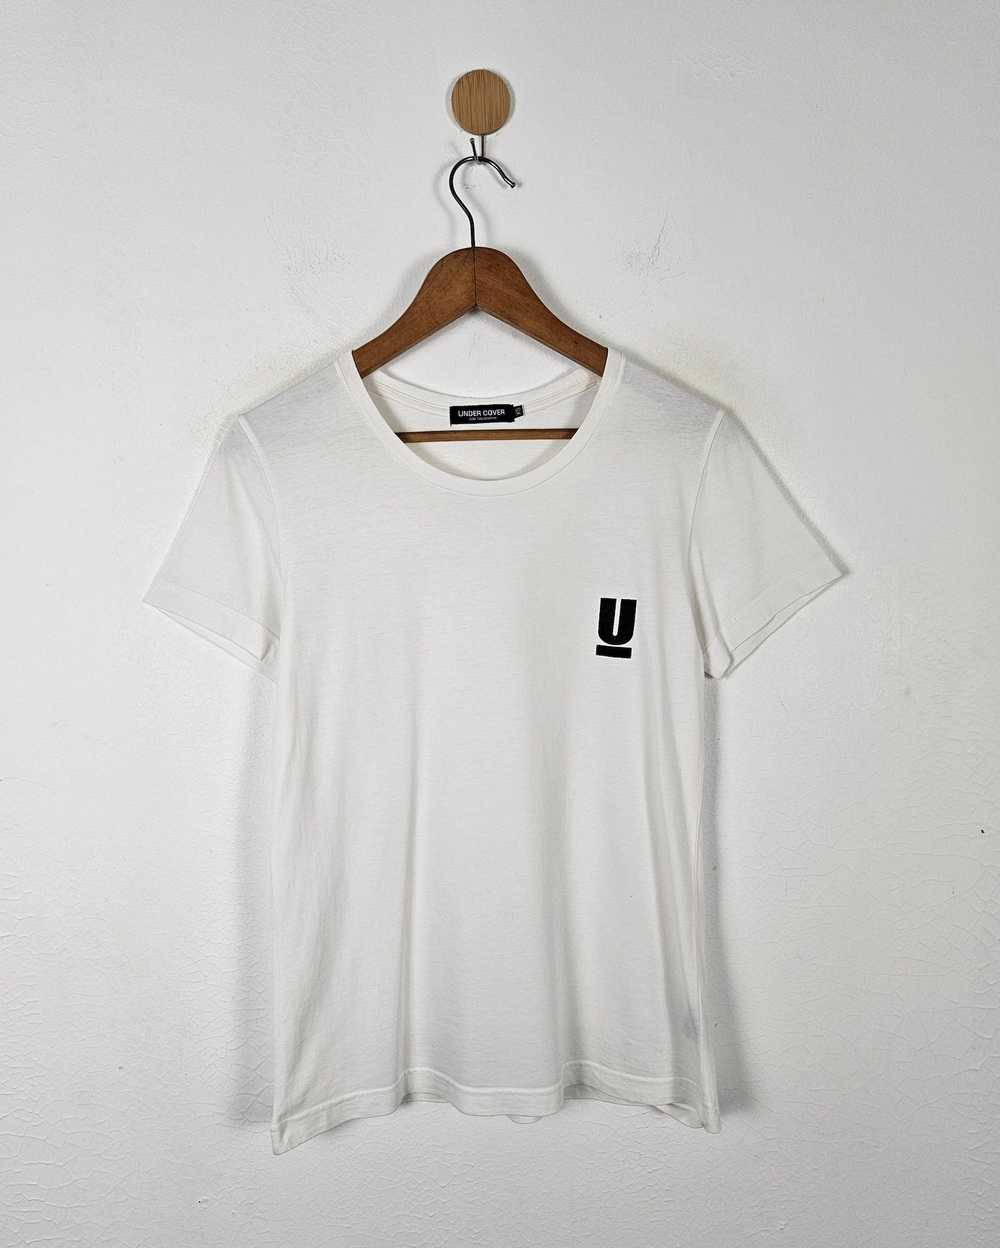 Undercover Undercover We Make Noise shirt - image 1